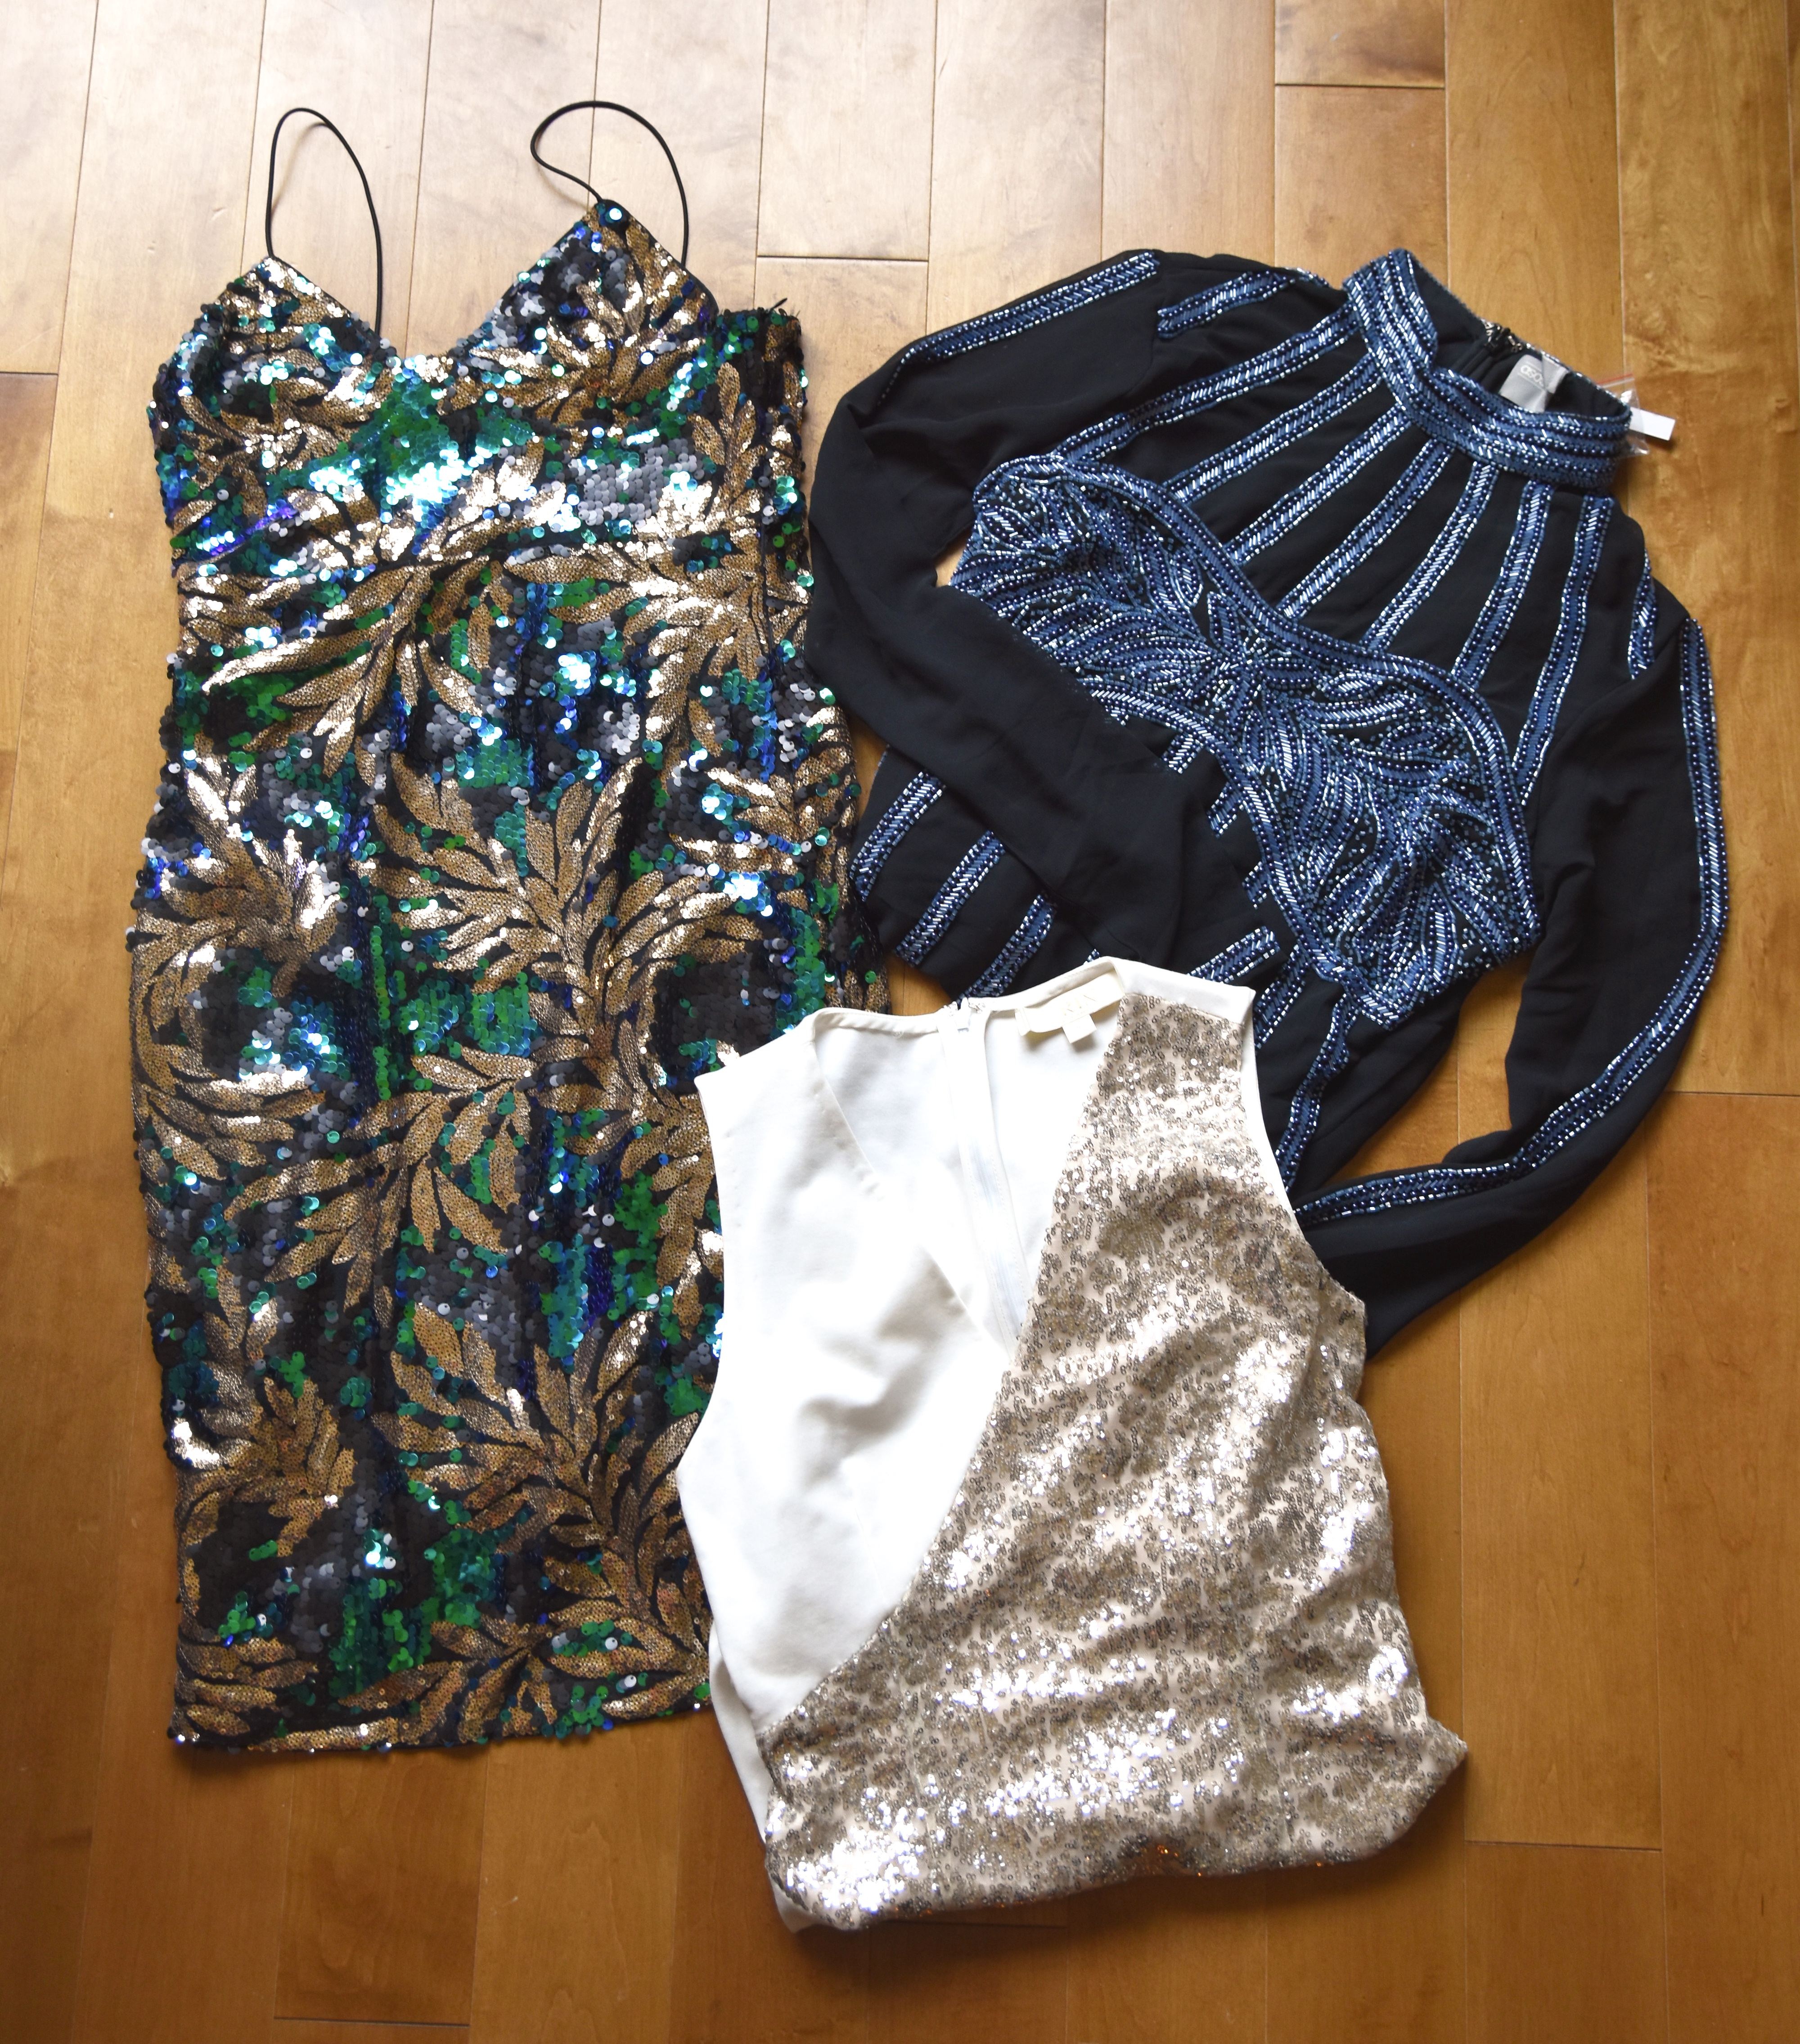 A2F What to Pack for a Bachelorette Weekend Sequin dresses from Asos and Boohoo